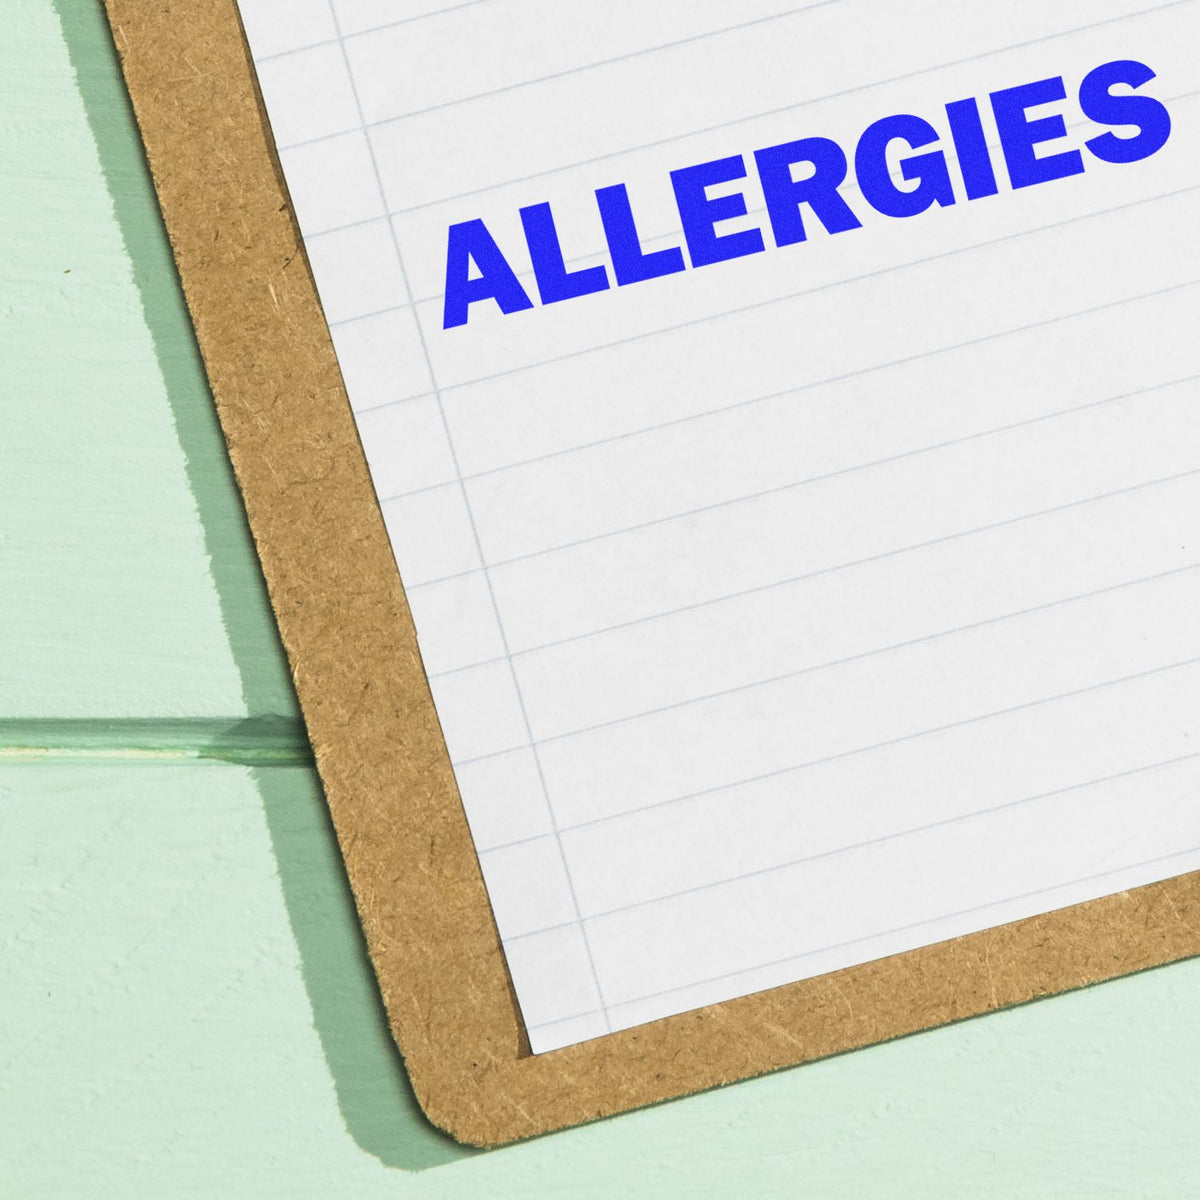 Large Allergies Rubber Stamp In Use Photo